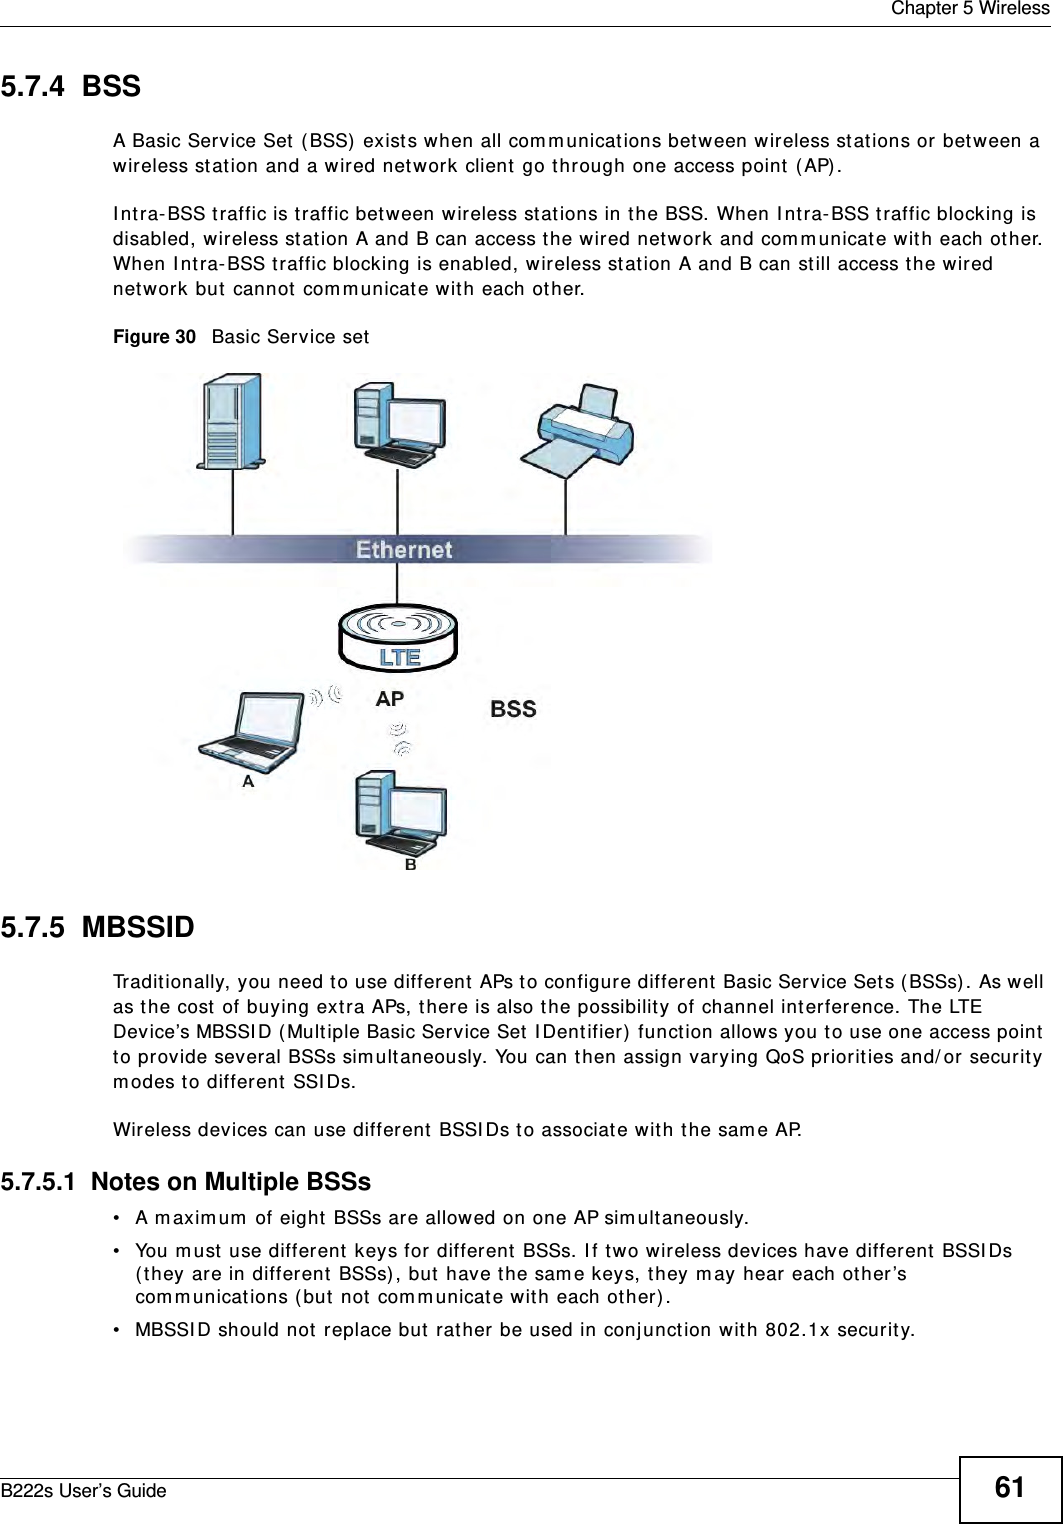  Chapter 5 WirelessB222s User’s Guide 615.7.4  BSSA Basic Service Set  ( BSS)  exist s when all com m unicat ions bet ween wireless stations or between a wir eless stat ion and a wired network client  go t hrough one access point  ( AP) . I nt ra- BSS t raffic is t raffic bet w een wireless stations in t he BSS. When I nt ra- BSS t raffic blocking is disabled, wireless st at ion A and B can access the wired network and com municate wit h each other. When I nt ra- BSS t raffic blocking is enabled, wir eless stat ion A and B can st ill access the wired network but  cannot  com m unicate wit h each ot her.Figure 30   Basic Service set5.7.5  MBSSIDTraditionally, you need to use different  APs to configure different  Basic Service Sets ( BSSs) . As w ell as t he cost  of buying ext ra APs, there is also t he possibility of channel int erference. The LTE Device’s MBSSI D ( Multiple Basic Service Set I Dent ifier)  function allows you t o use one access point to provide several BSSs sim ultaneously. You can t hen assign varying QoS priorities and/ or security m odes t o different SSI Ds.Wireless devices can use different BSSI Ds t o associate with t he sam e AP.5.7.5.1  Notes on Multiple BSSs• A m axim um  of eight  BSSs are allowed on one AP sim ultaneously.• You m ust use different keys for different BSSs. I f t wo wireless devices have different  BSSI Ds ( t hey are in different  BSSs) , but  have the sam e keys, they m ay hear each ot her ’s com munications ( but not  com m unicate with each ot her) .• MBSSI D should not  replace but rather be used in conj unct ion wit h 802.1x securit y.